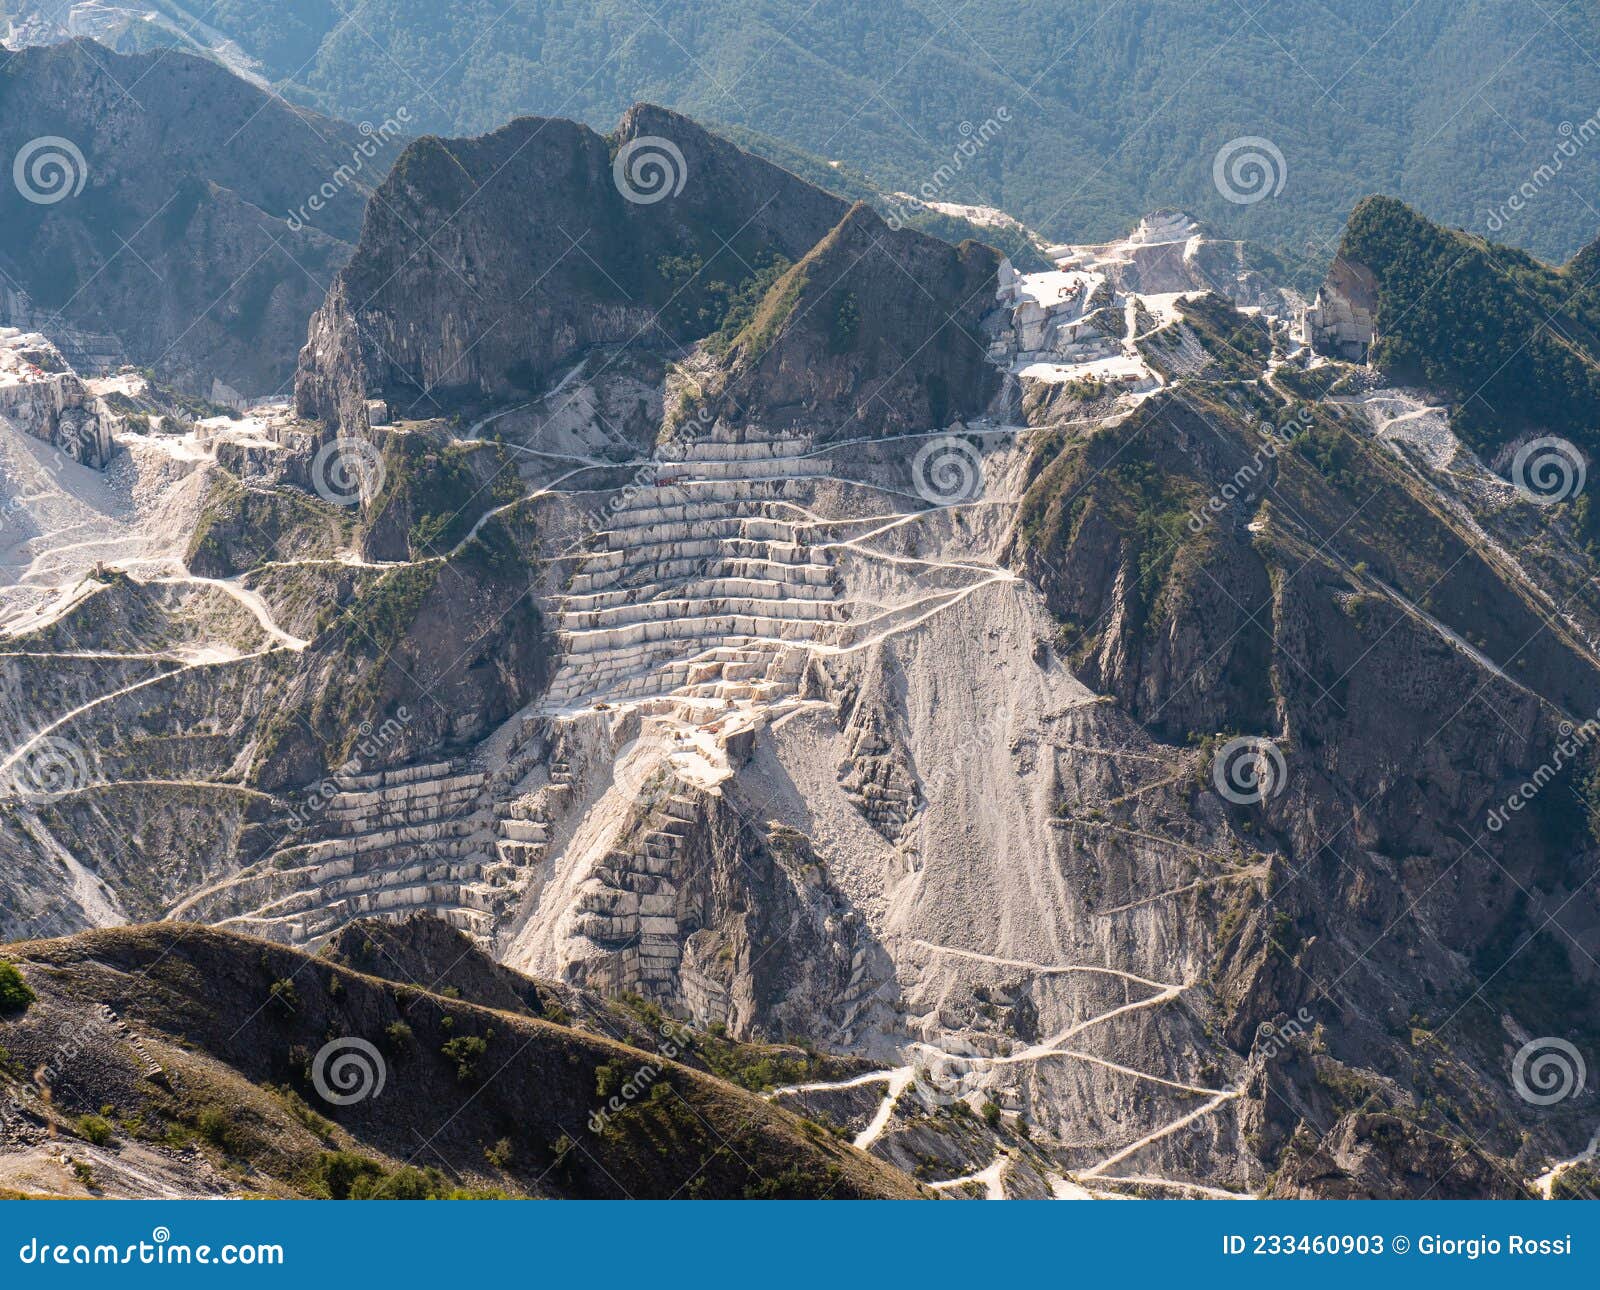 view of the carrara marble quarries in italy